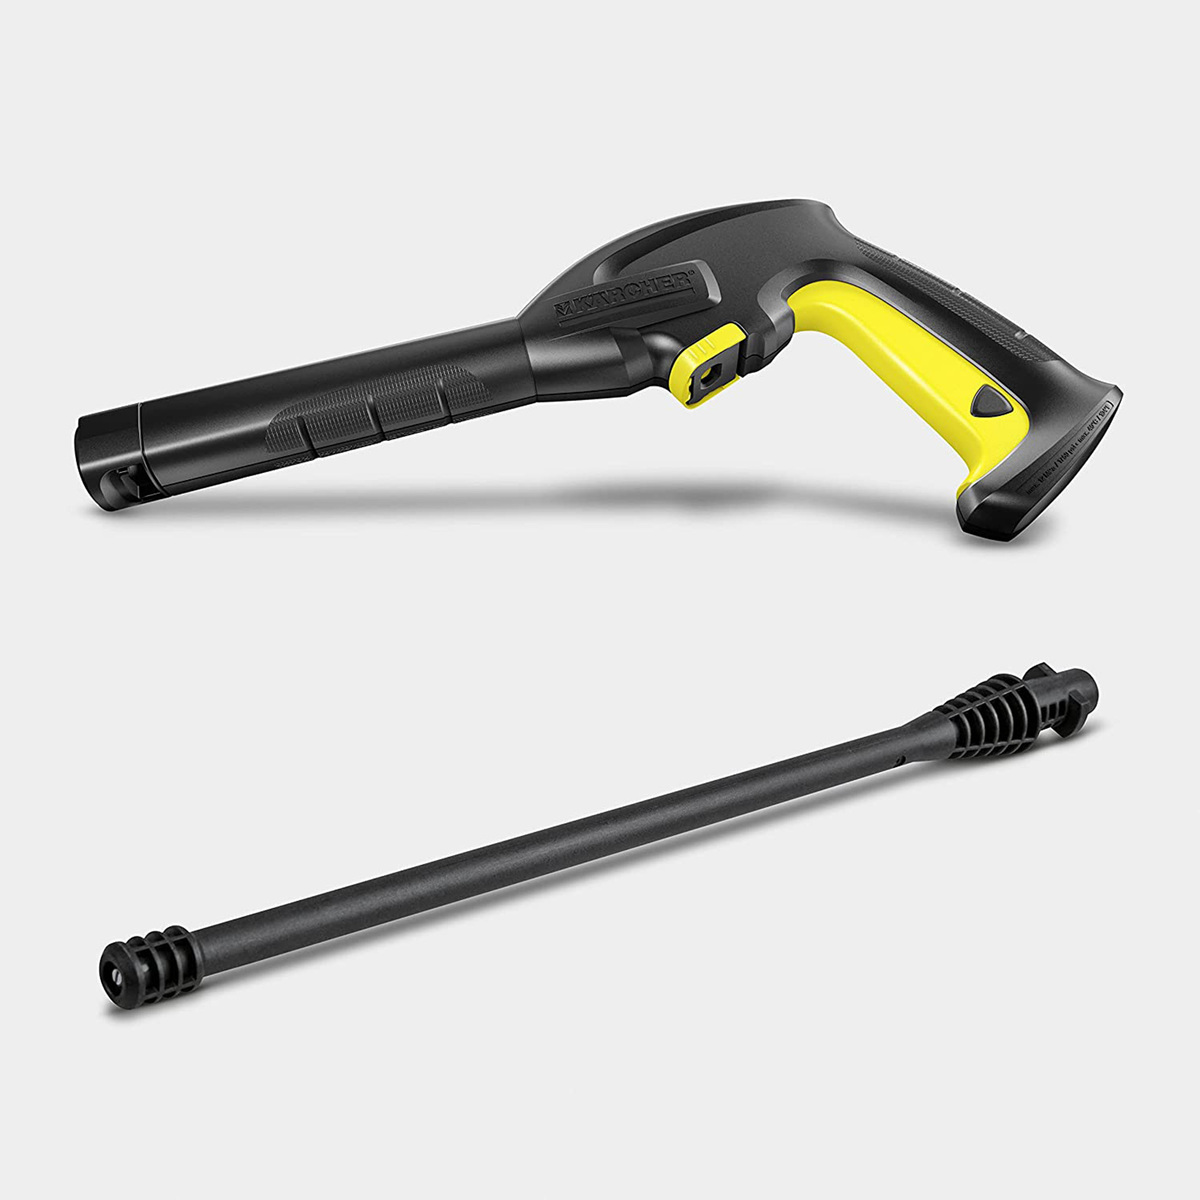 Karcher K1 Horizontal Pressure Washer With 6 m High Pressure Hose, water removal